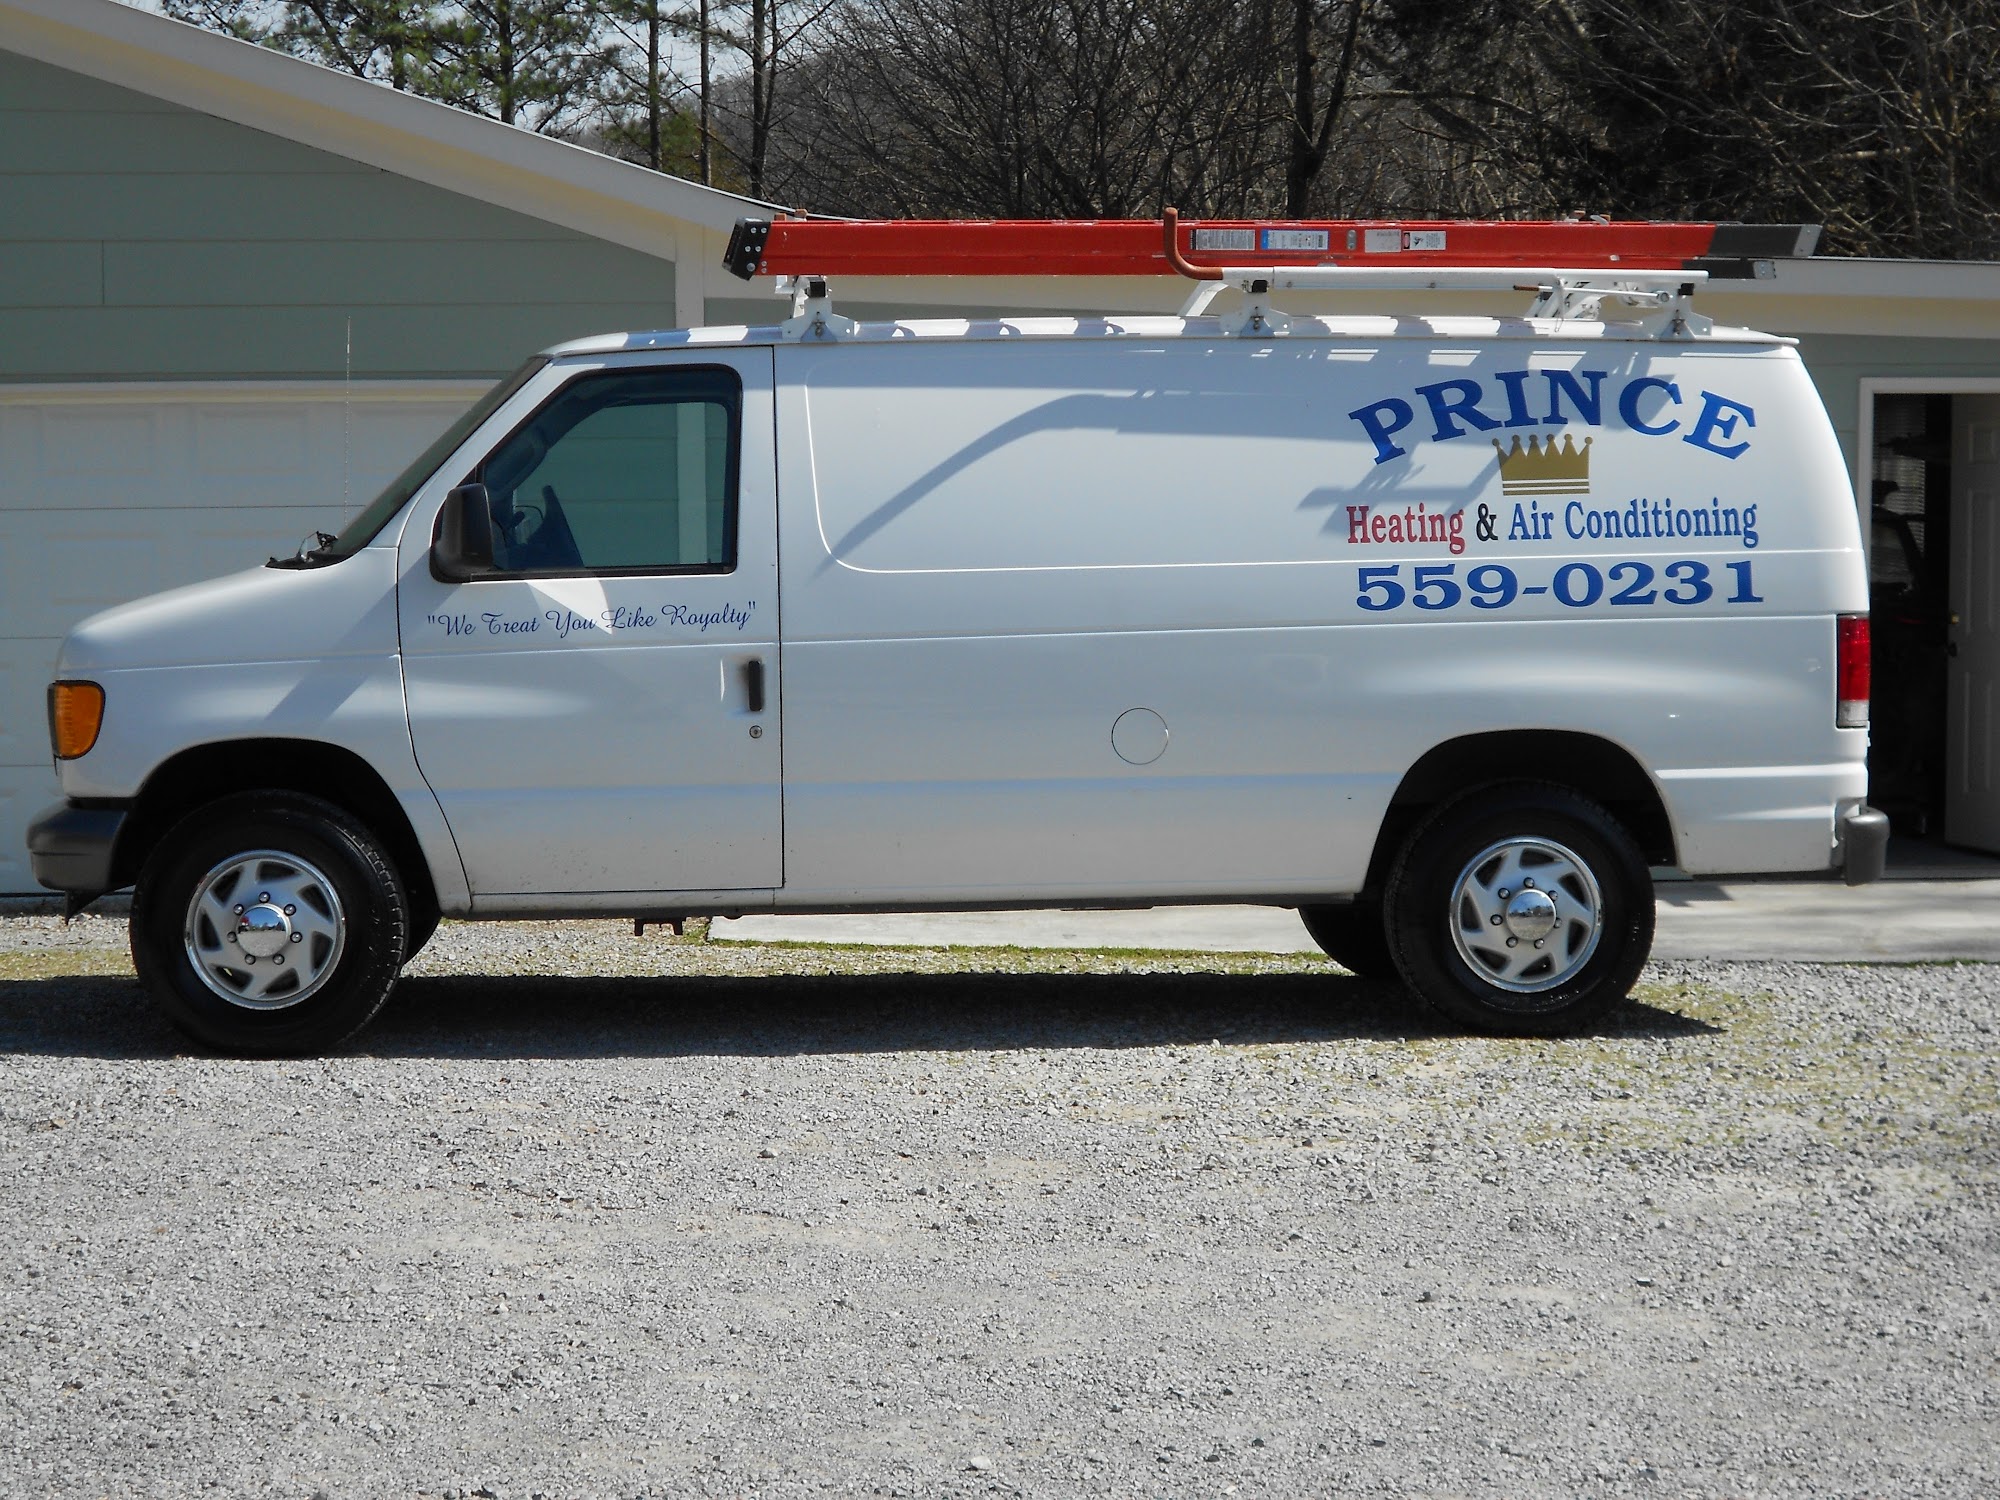 Prince Heating & Air Conditioning